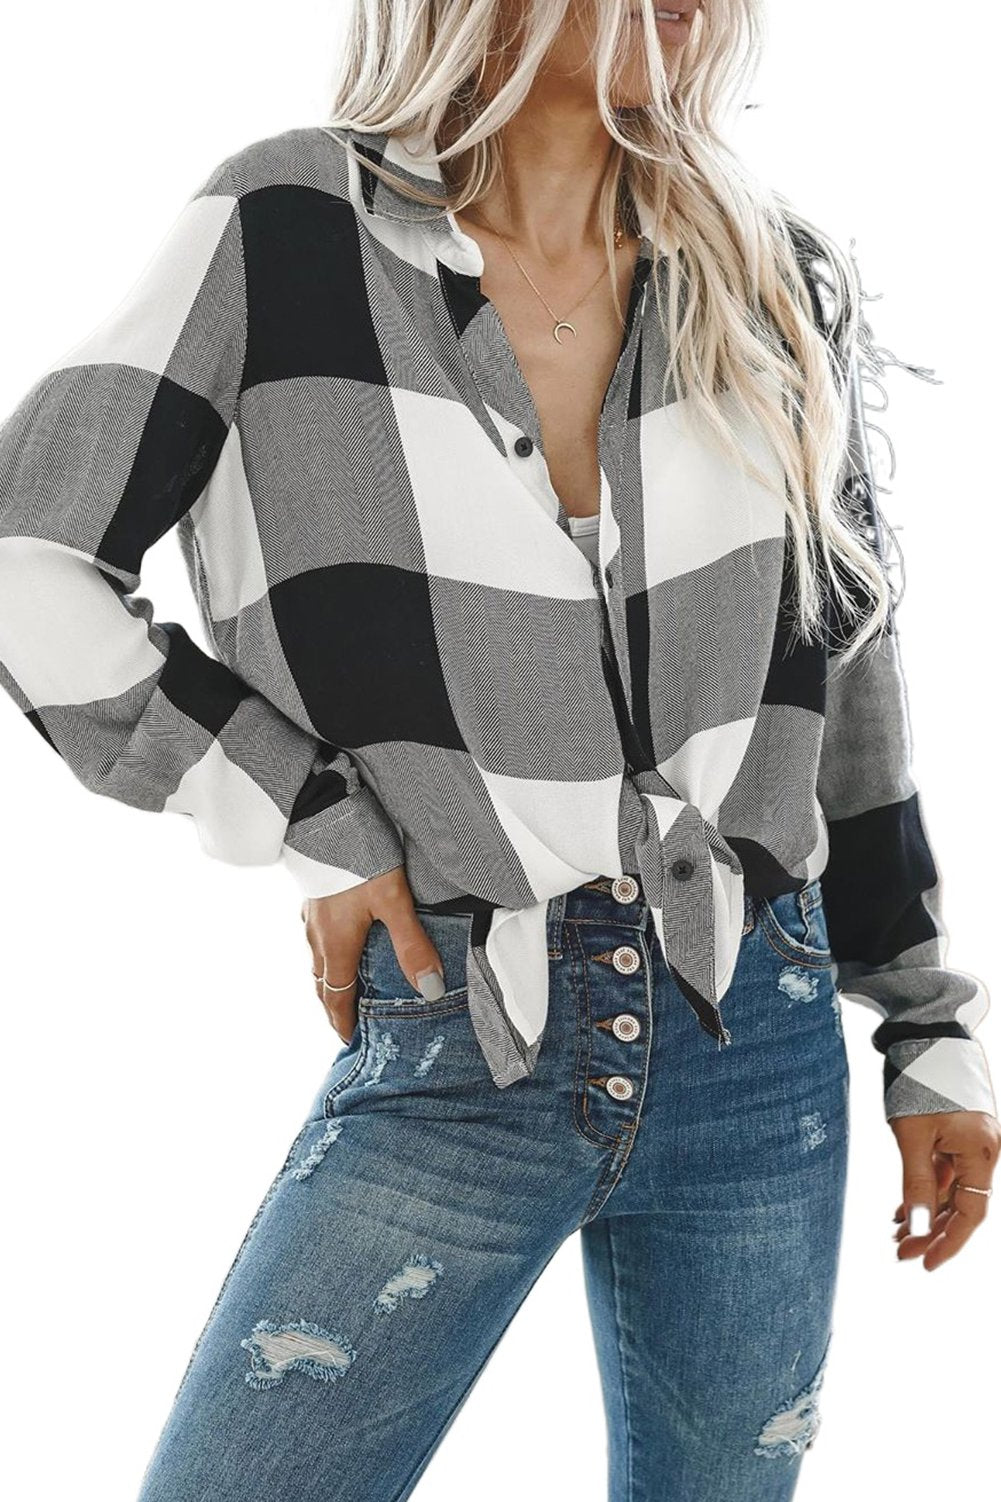 Women's Turn Down Collar Button Down Flannel Blouse front view on white background